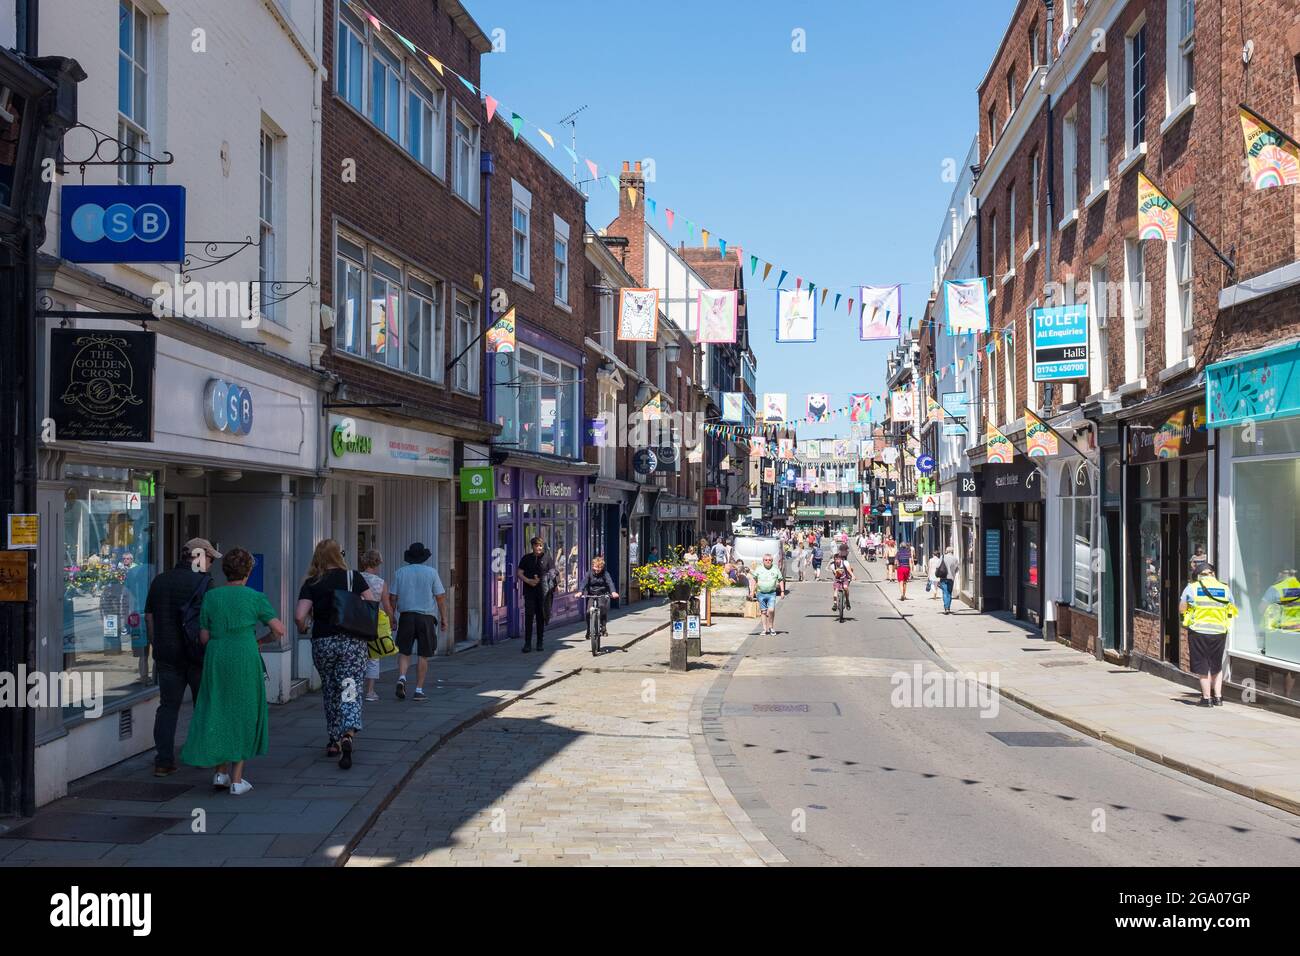 Shops and shoppers in High Street, Shrewsbury, Shropshire Stock Photo ...